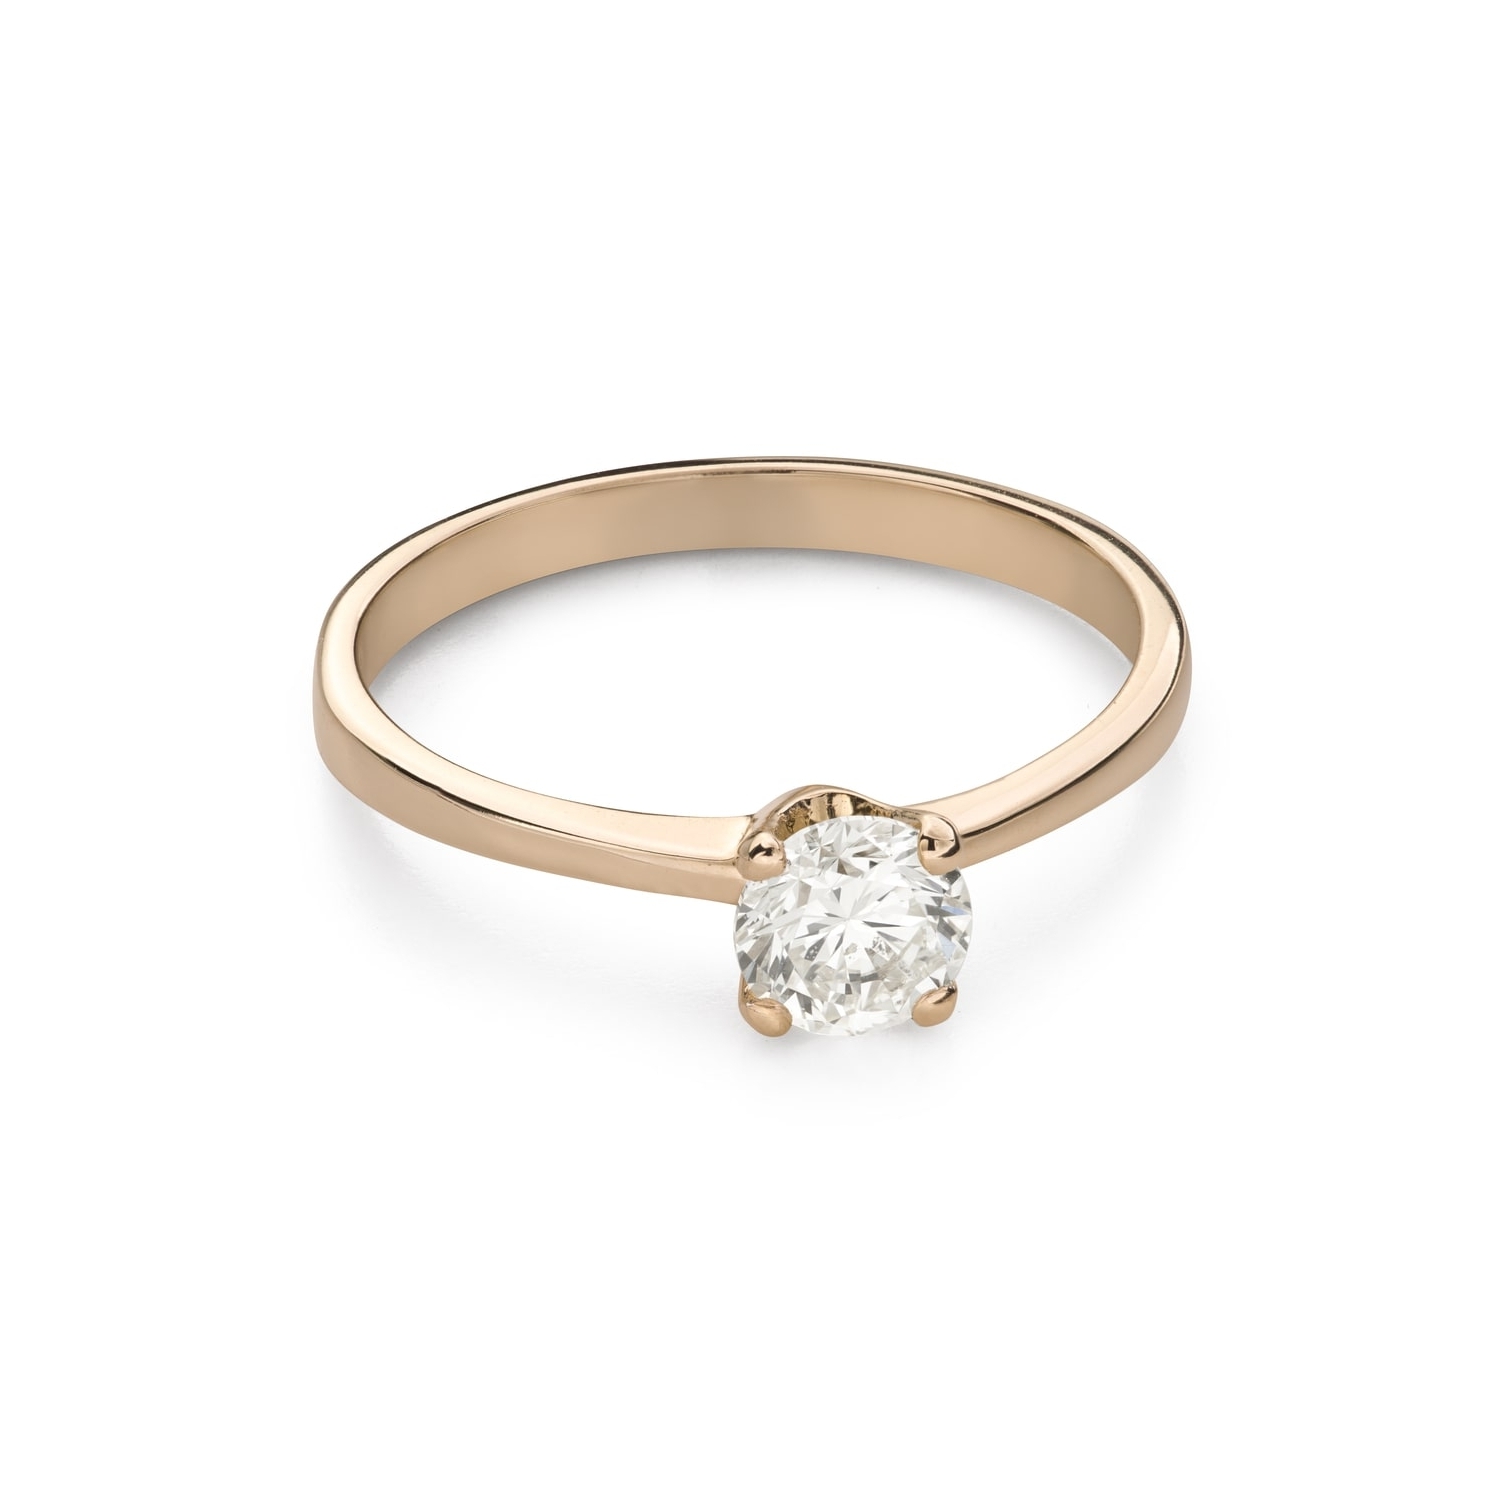 Engagment ring with brilliants "Goddess 501"